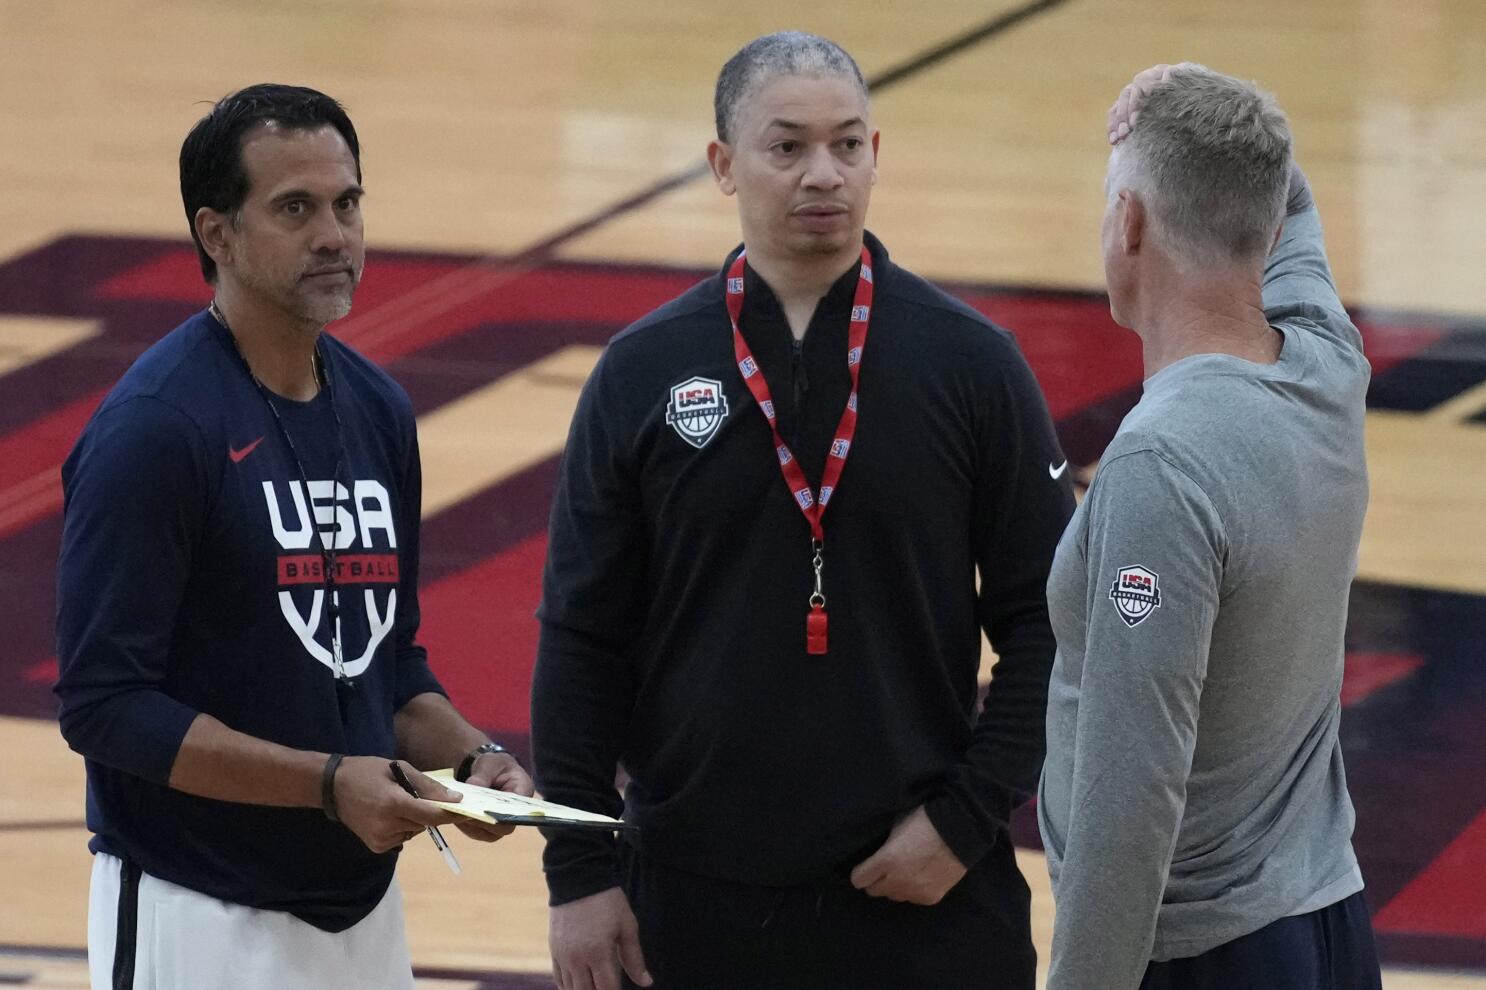 VIDEO: USA Basketball gives inside look at training camp with